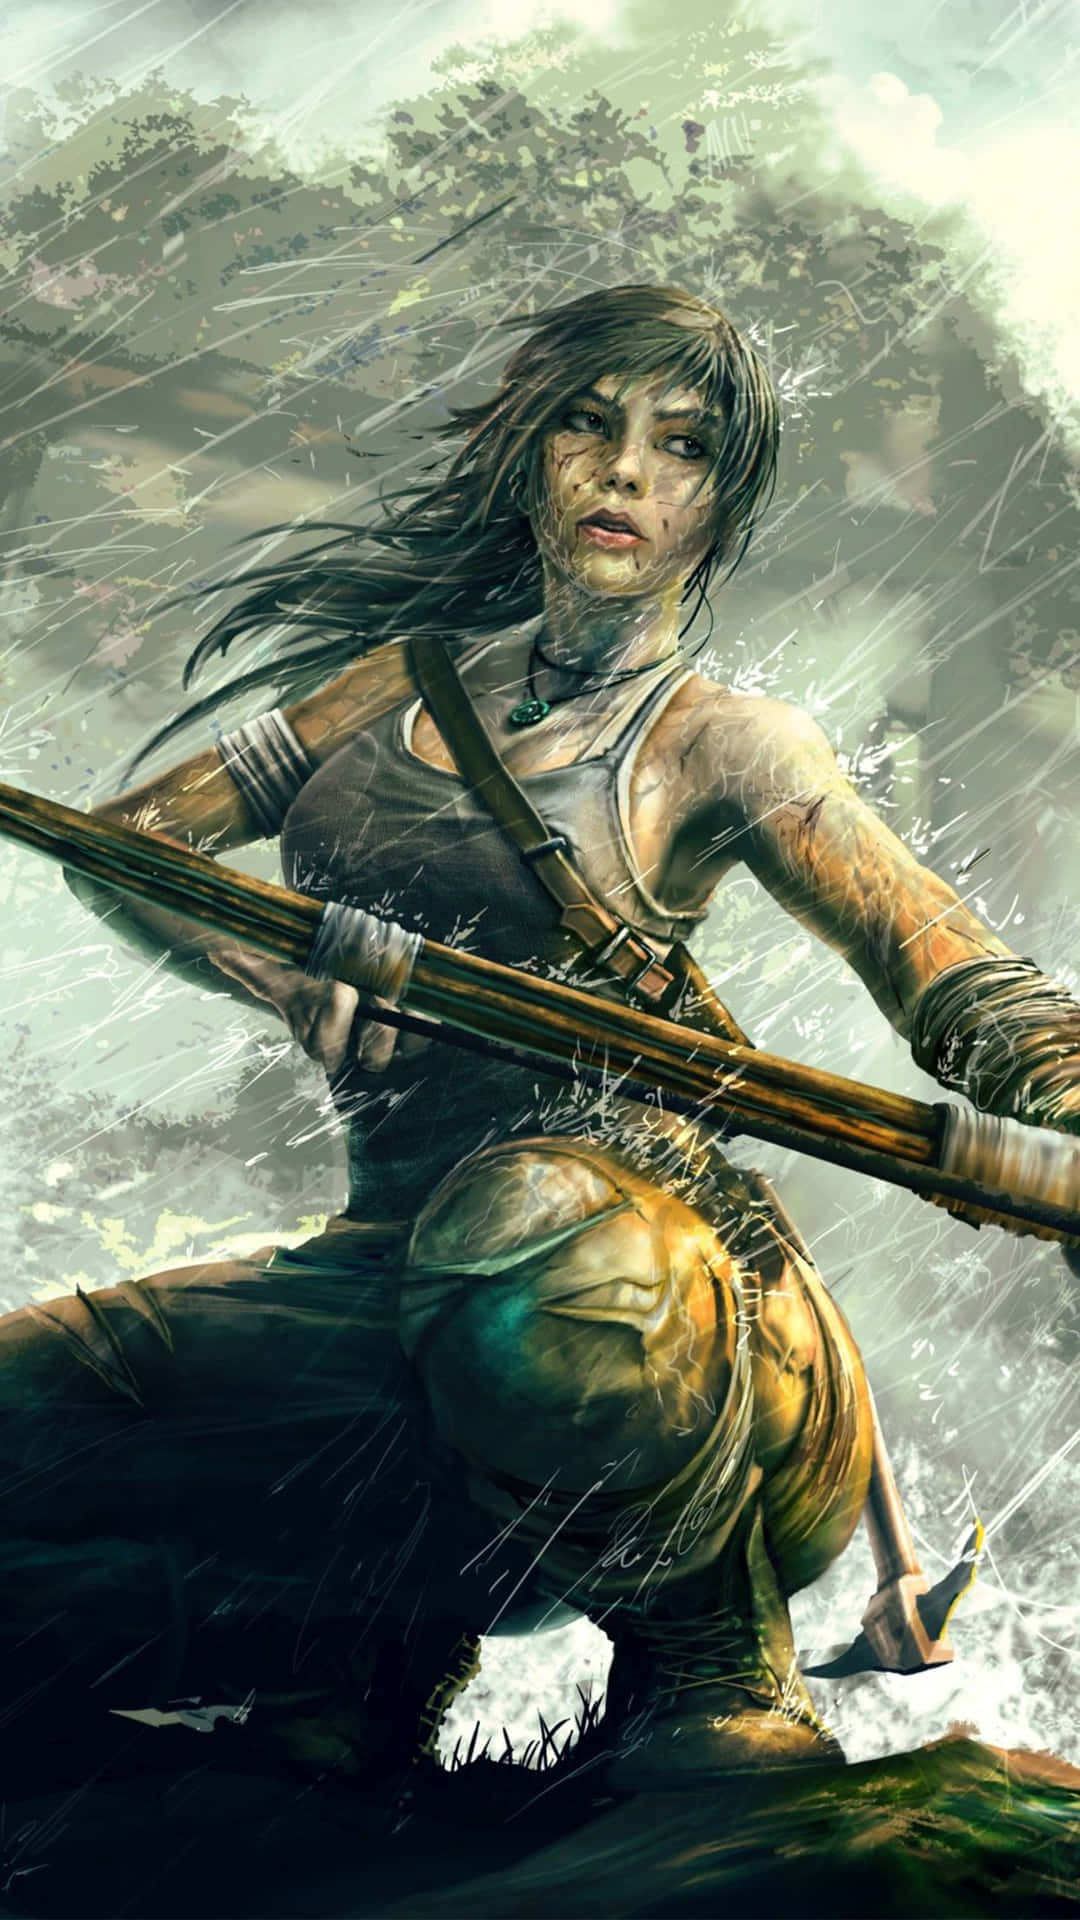 Traverse the dangerous&unknown in 'Shadow of Tomb Raider' Wallpaper